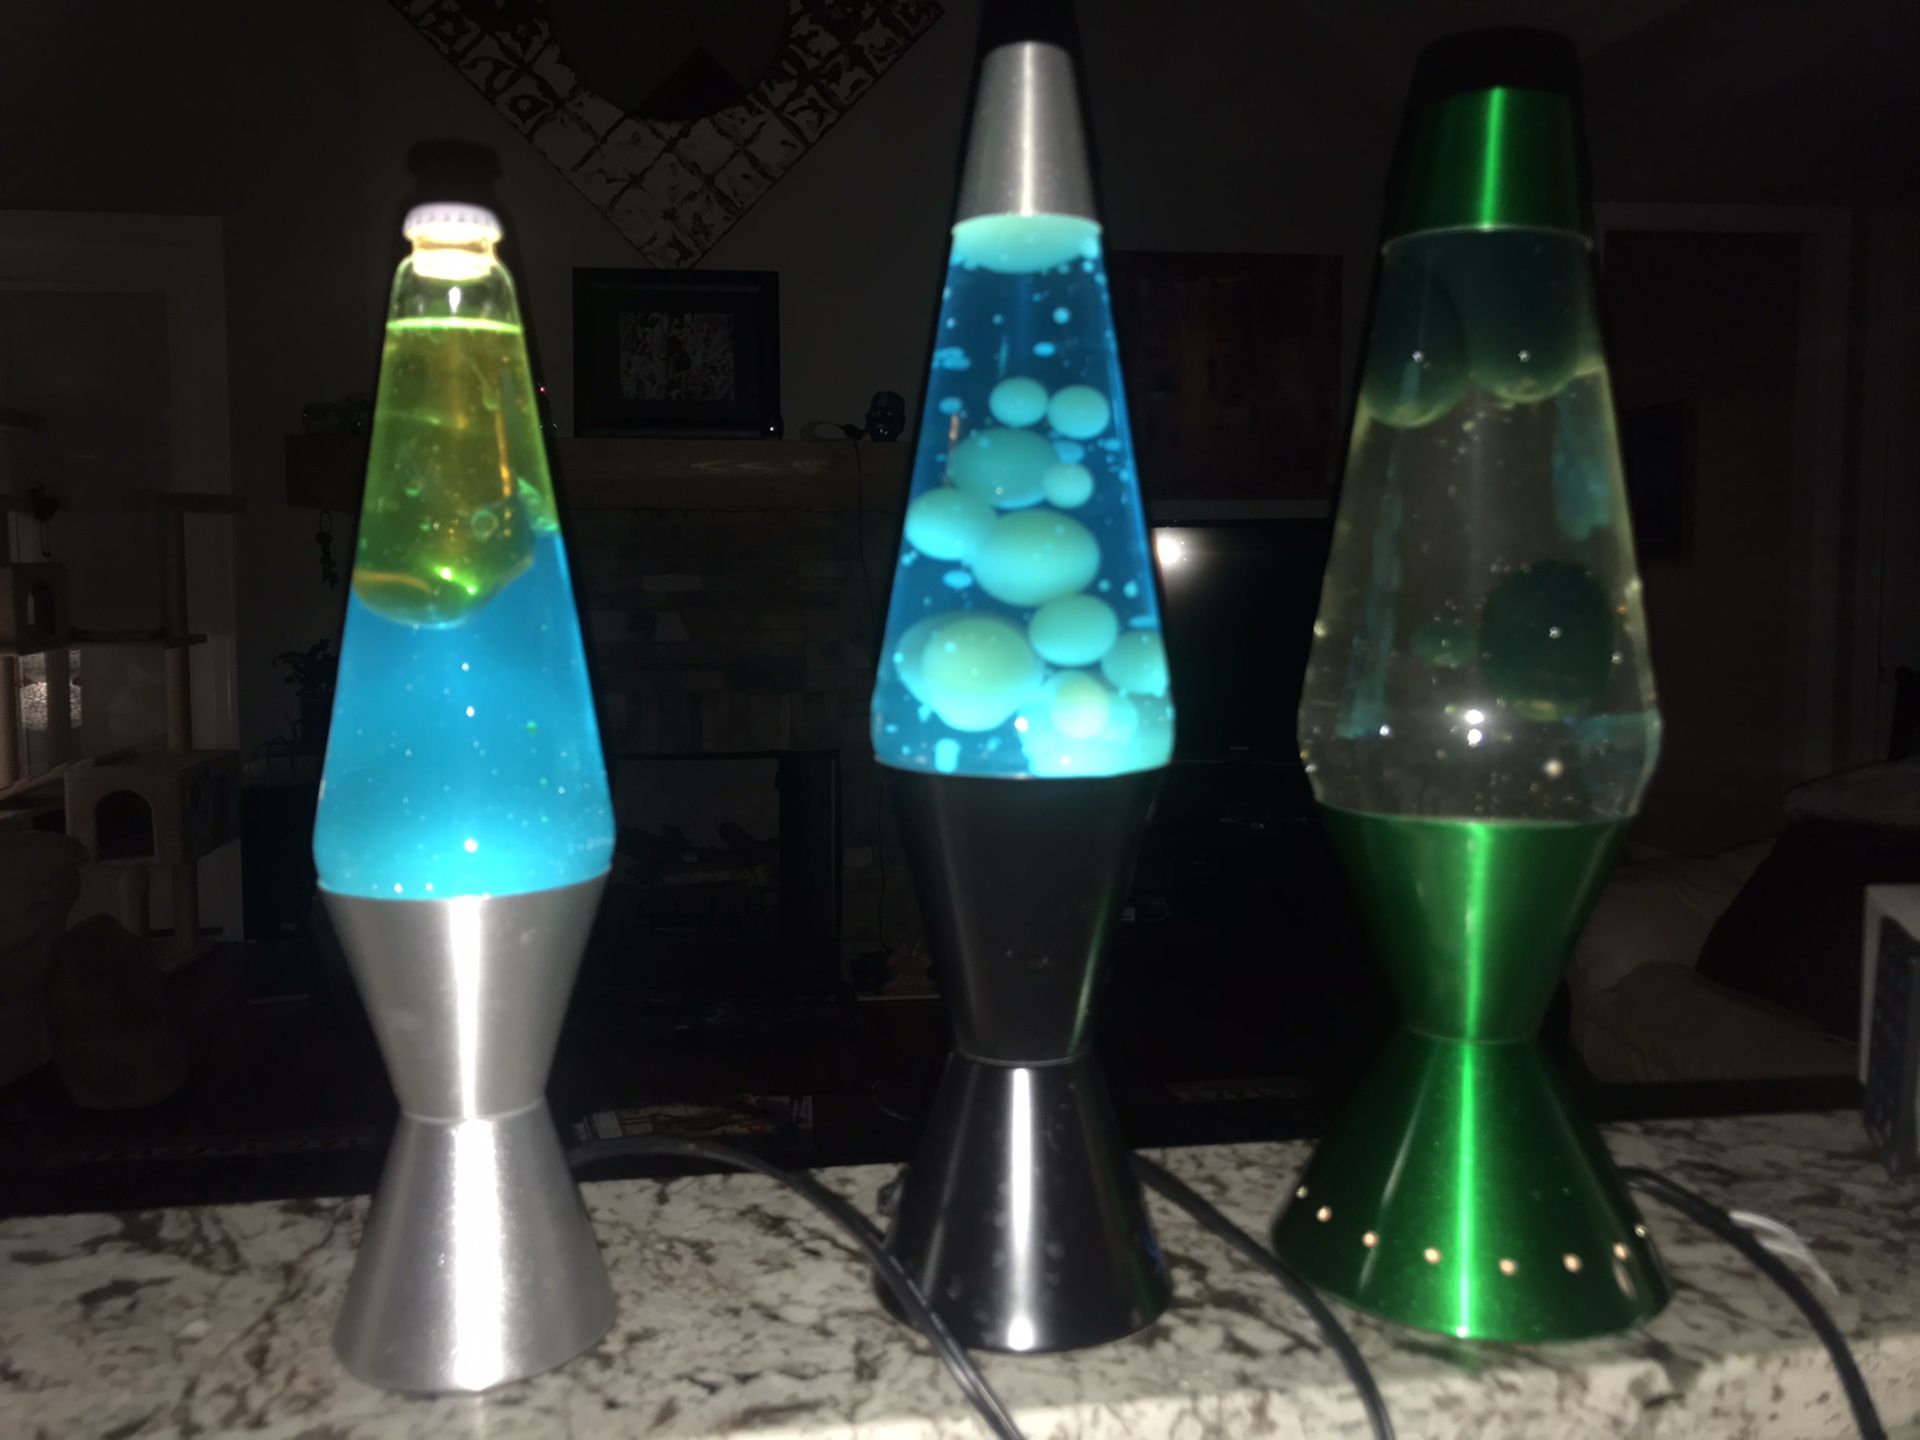 THREE LAVA LAMPS—$15 for ALL